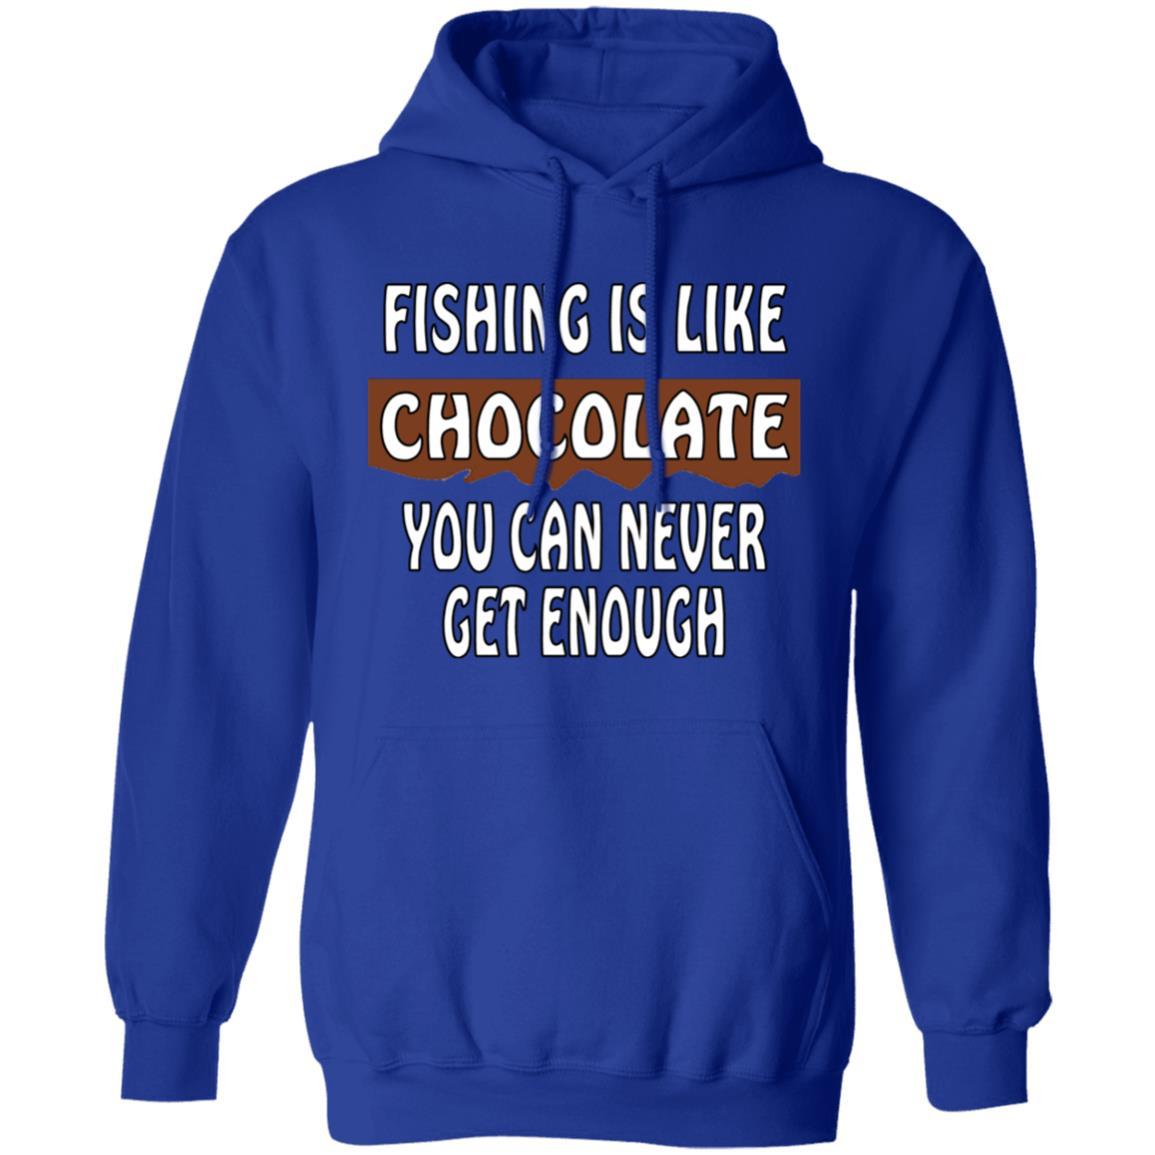 Fishing is like chocolate you can never get enough hoodie royal